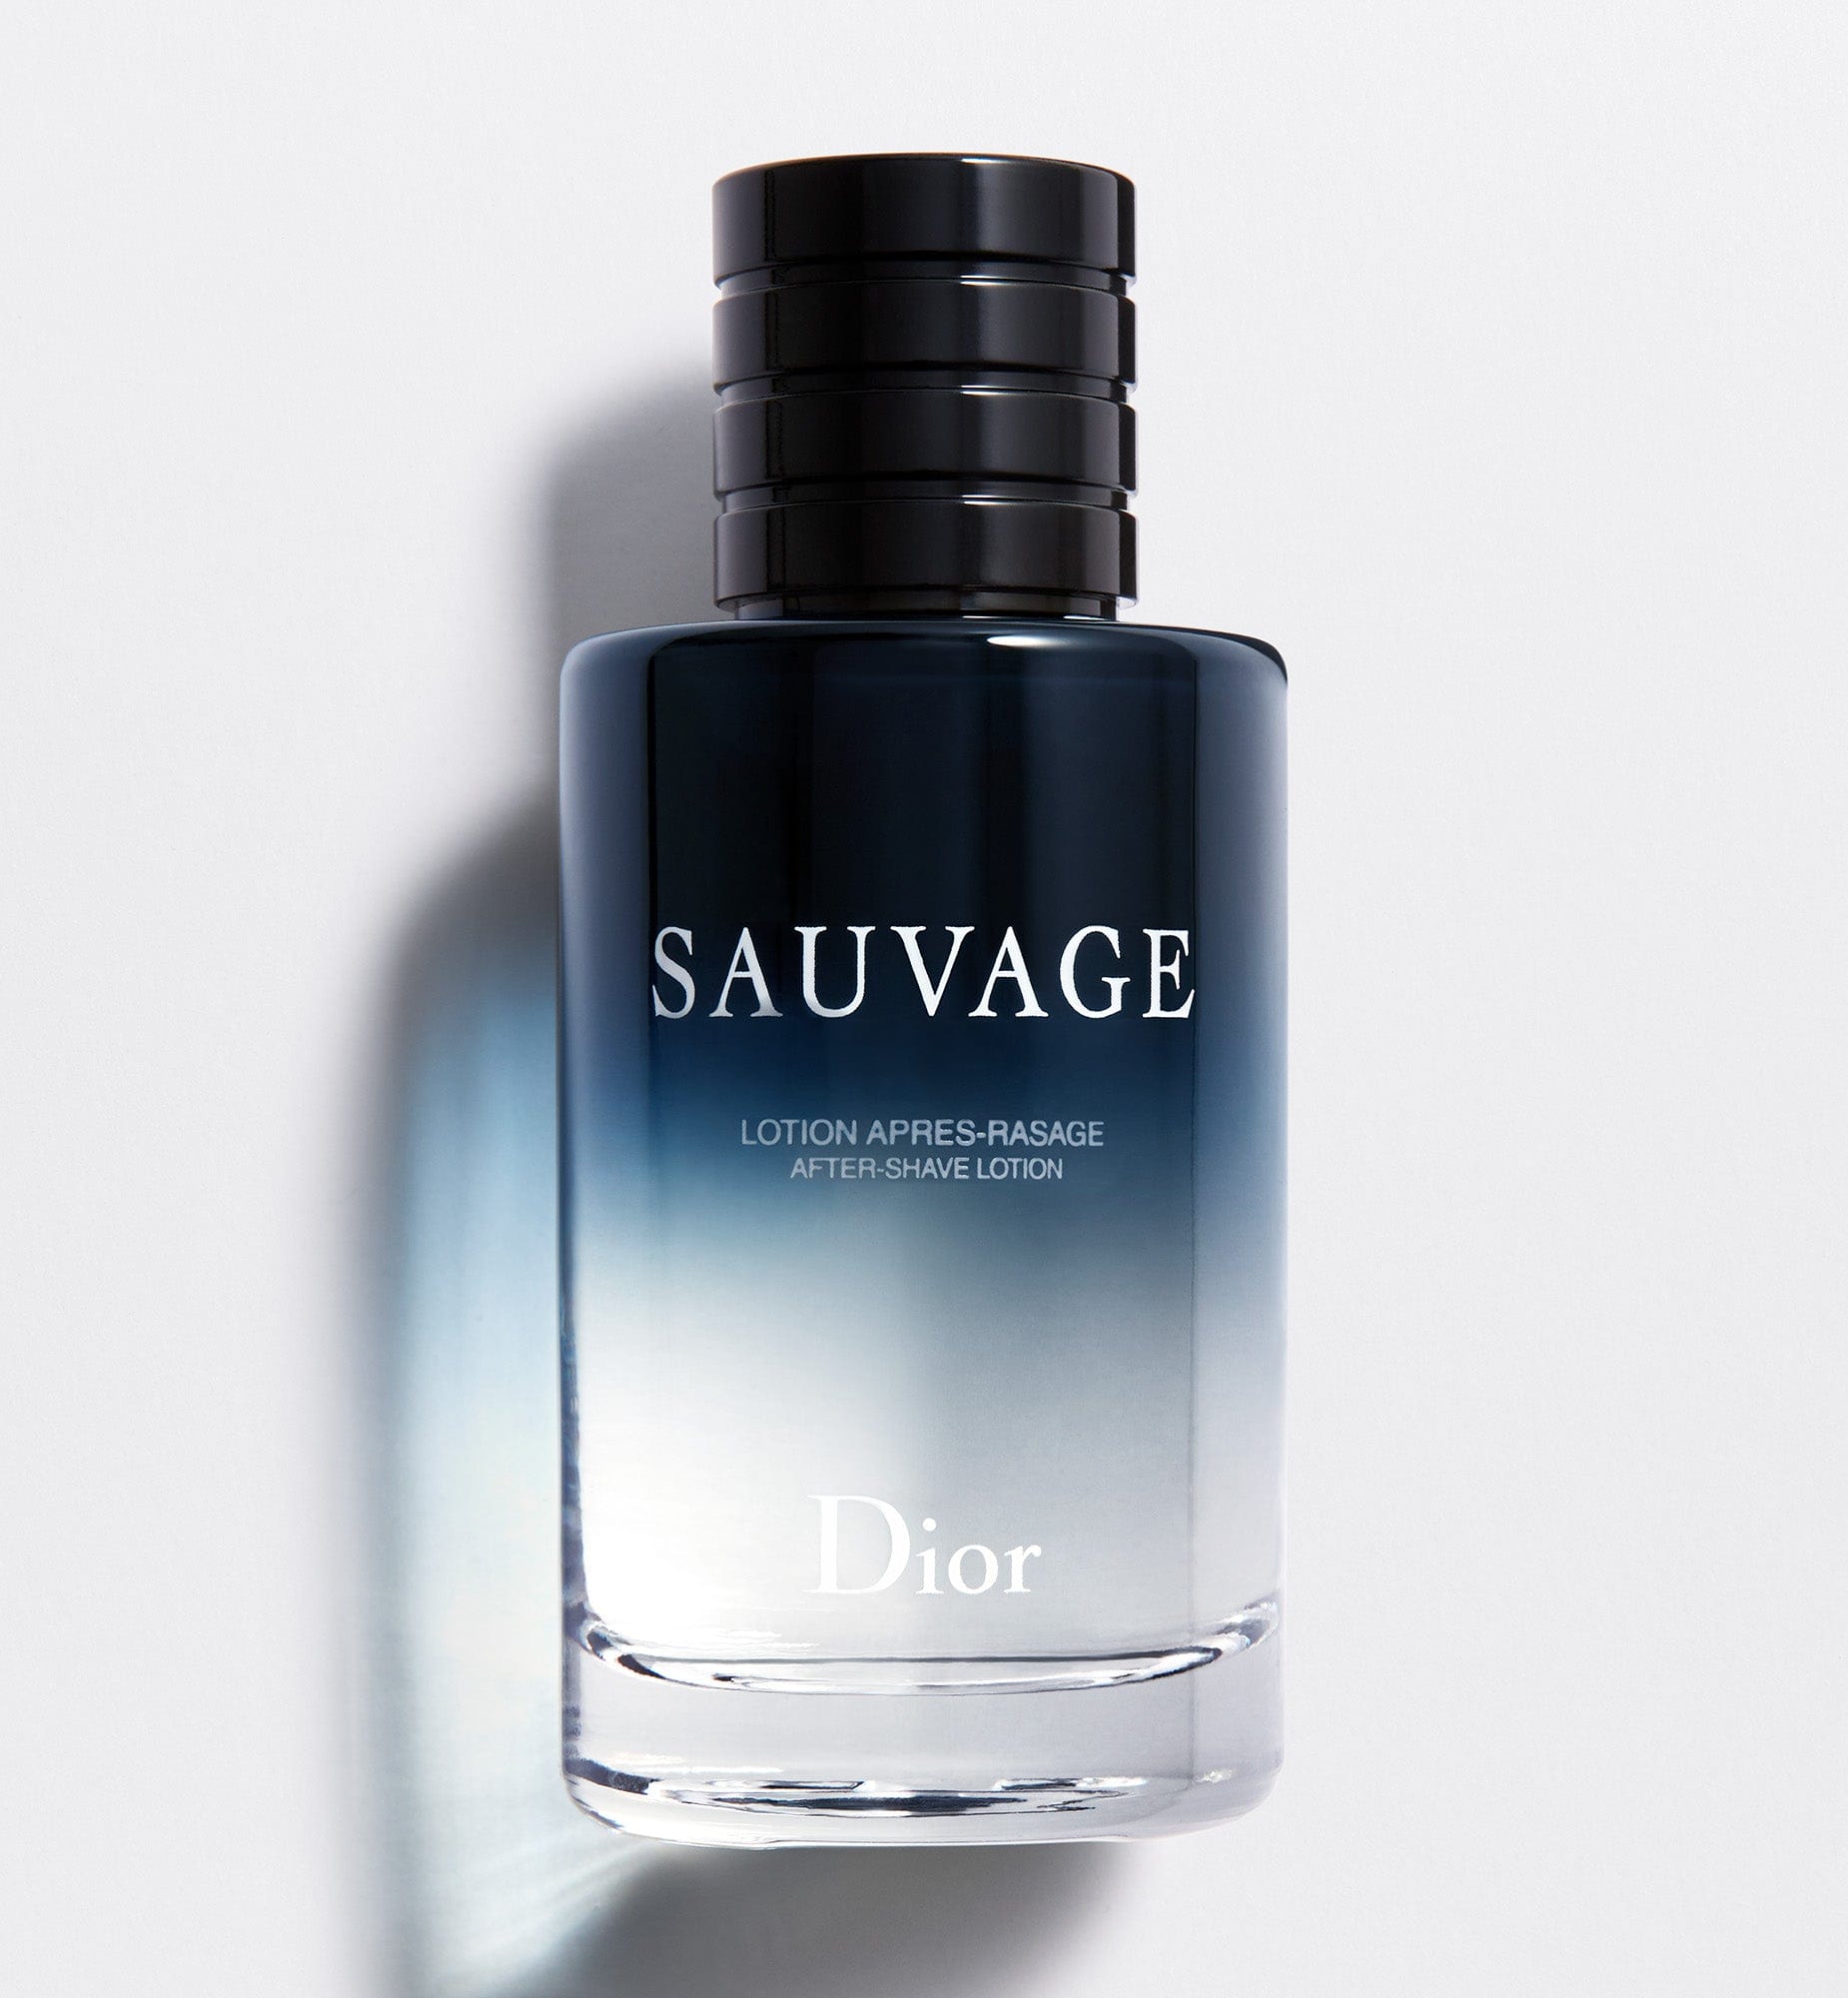 SAUVAGE | After-shave lotion